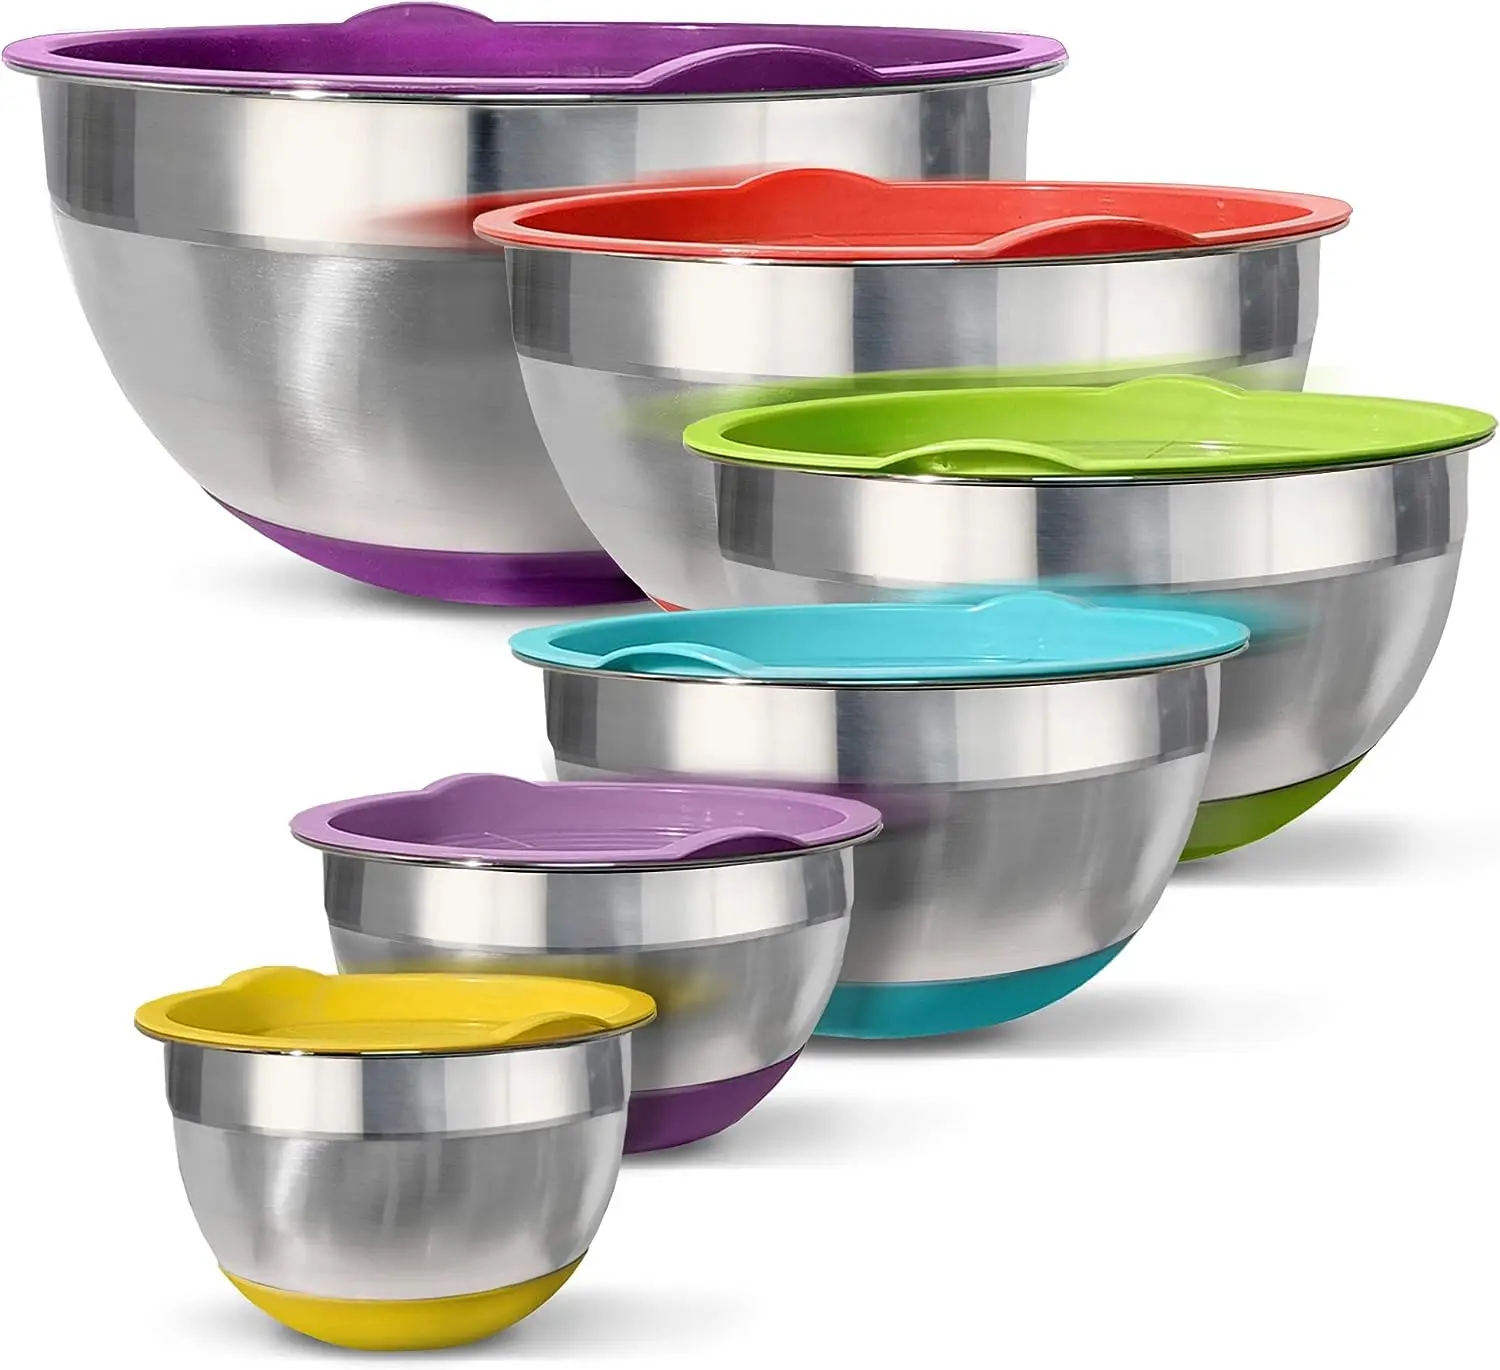 COOK WITH COLOR Mixing Bowls – 4 Piece Nesting Plastic Mixing Bowl